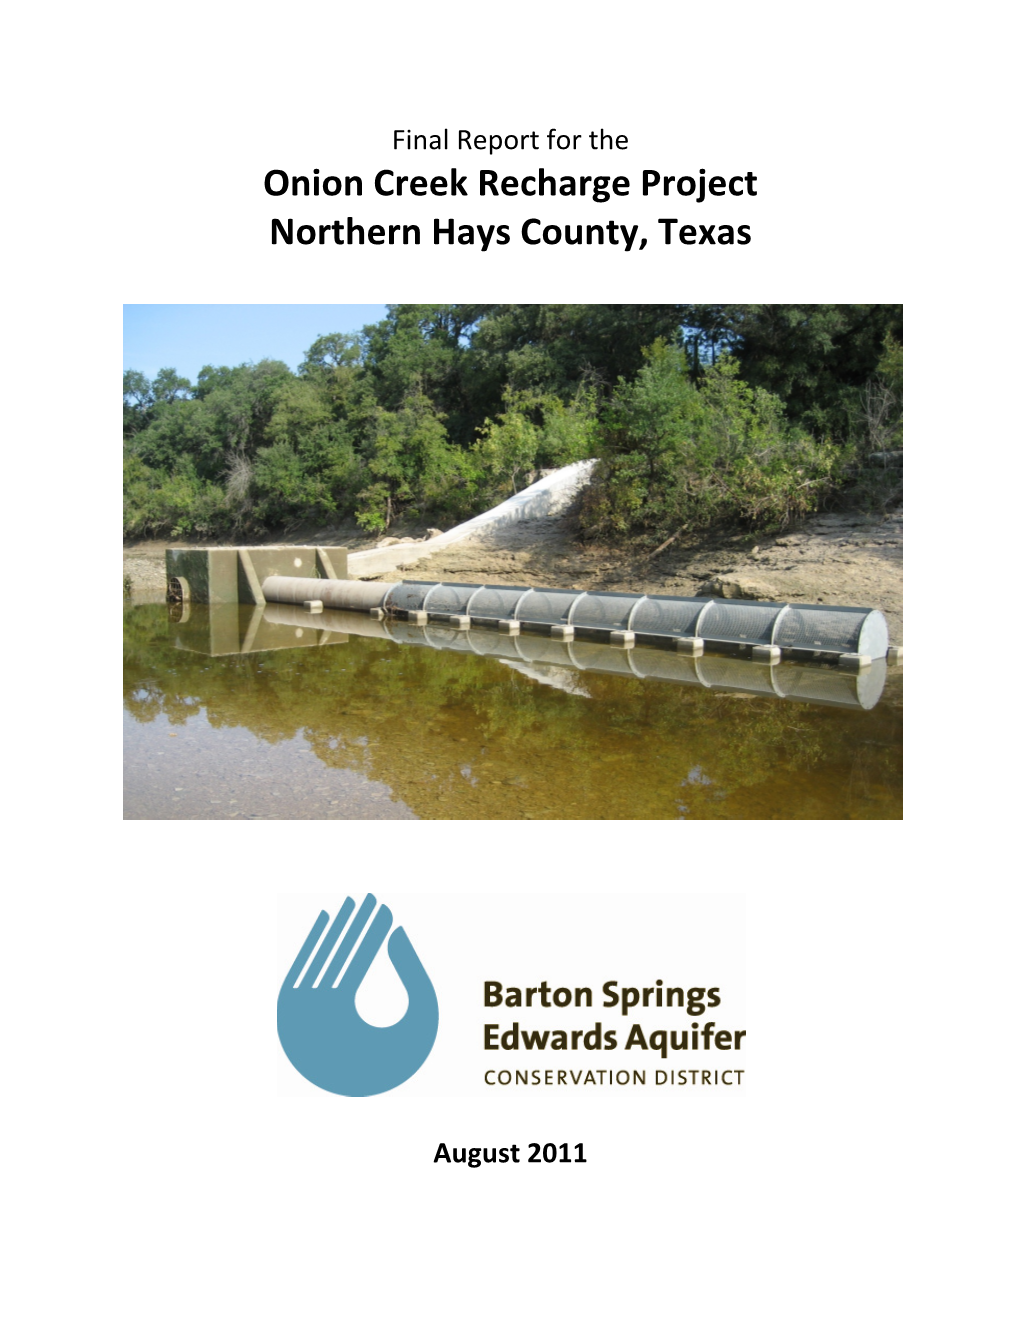 Onion Creek Recharge Project Northern Hays County, Texas